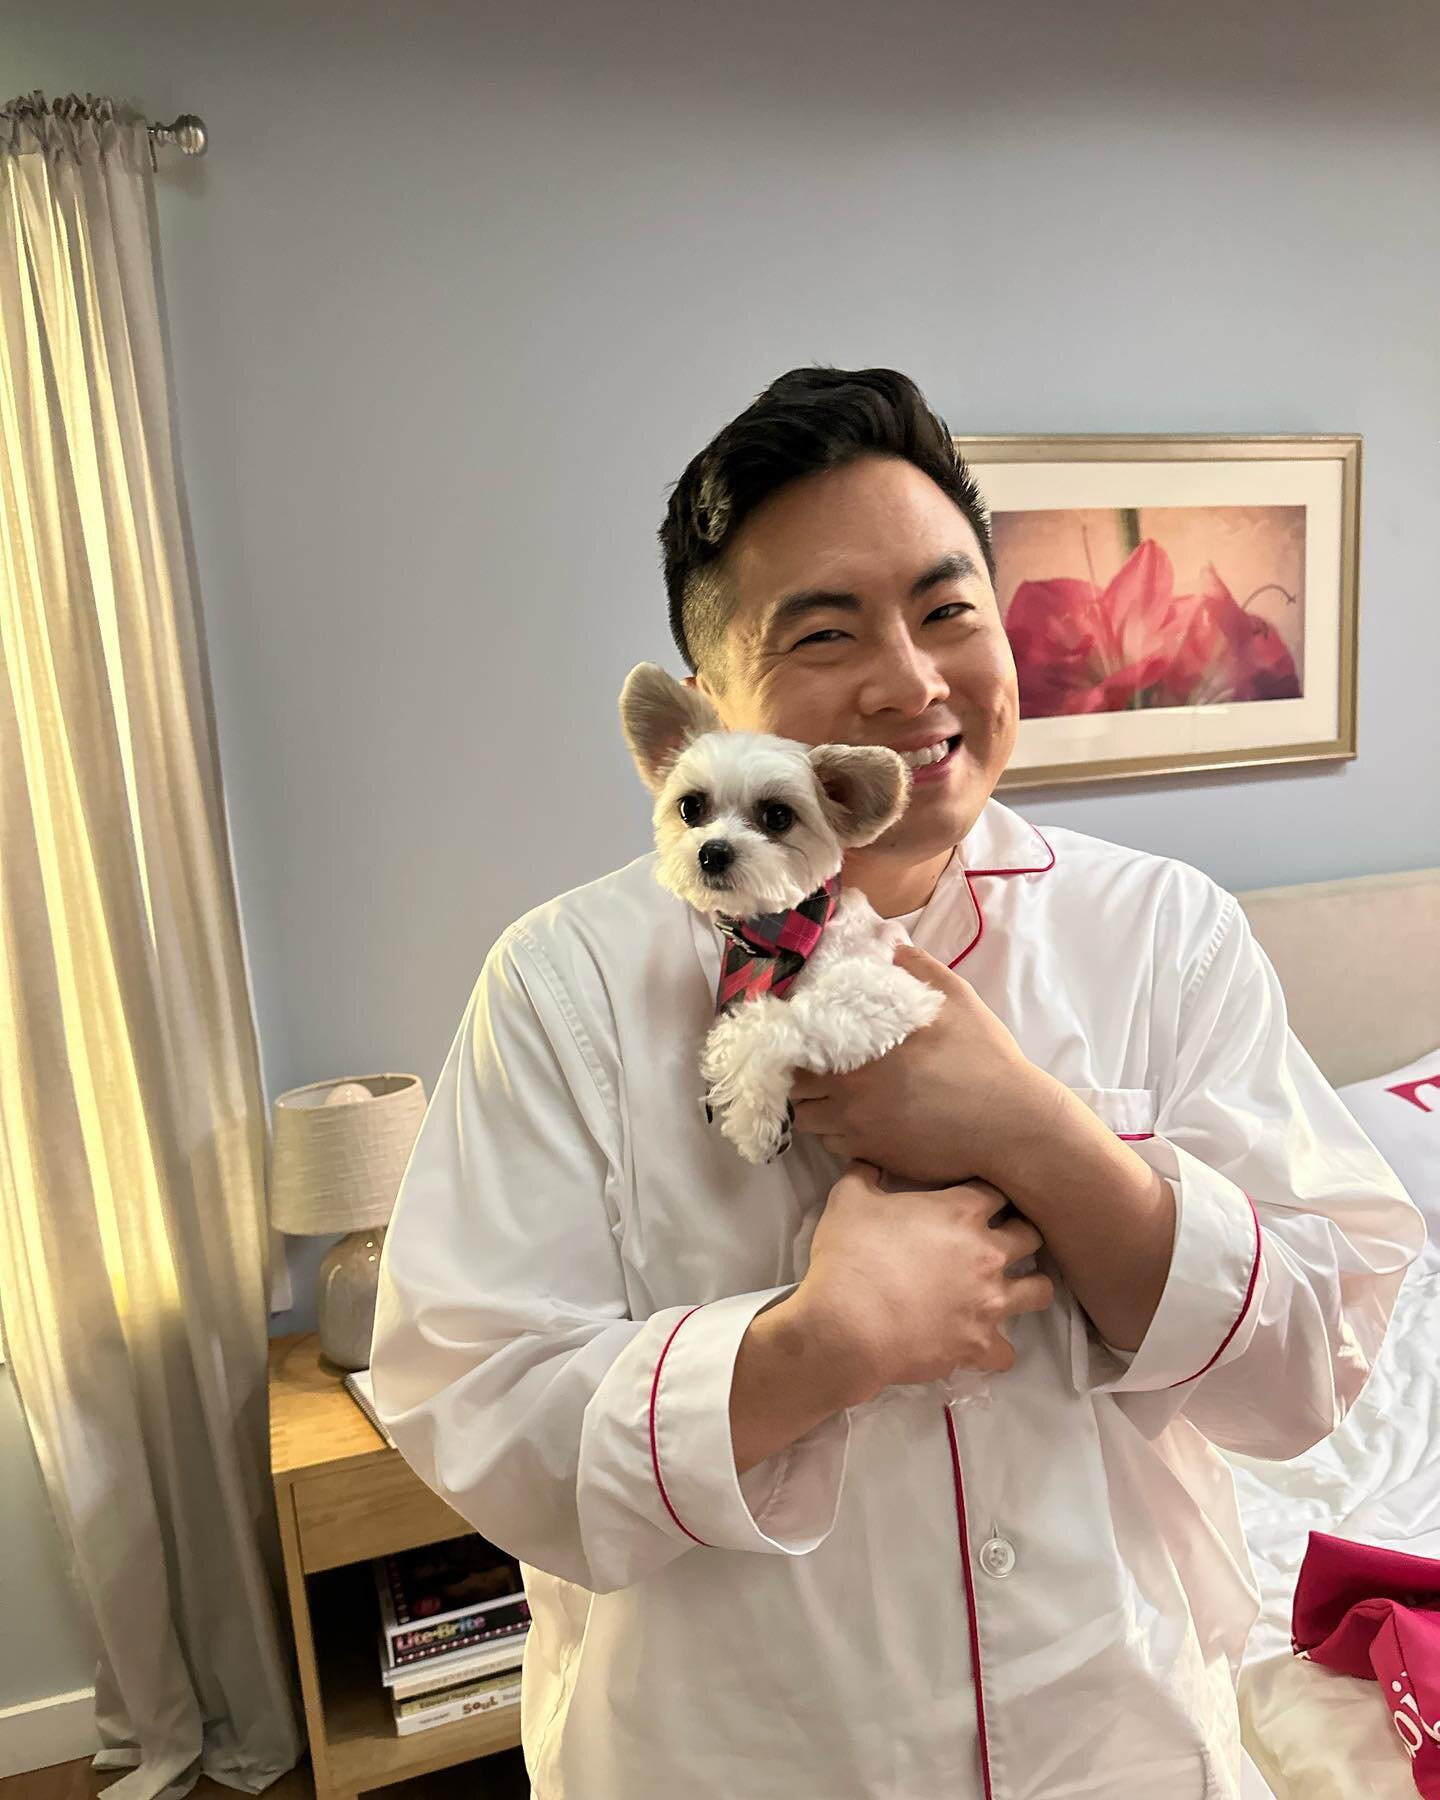 &ldquo;BEHIND THE SCENES on set with @fayedunaway, the @nbcsnl team and the @tmobile team. Woof! A day I will remember forever!!!&rdquo; - Belle 🐶🎥🌟

.
.
.
.
#dogsofnyc #dogactor #dogmodels #famousdogs #dogsofnewyork #dogsinfluencers #pupfluencer 